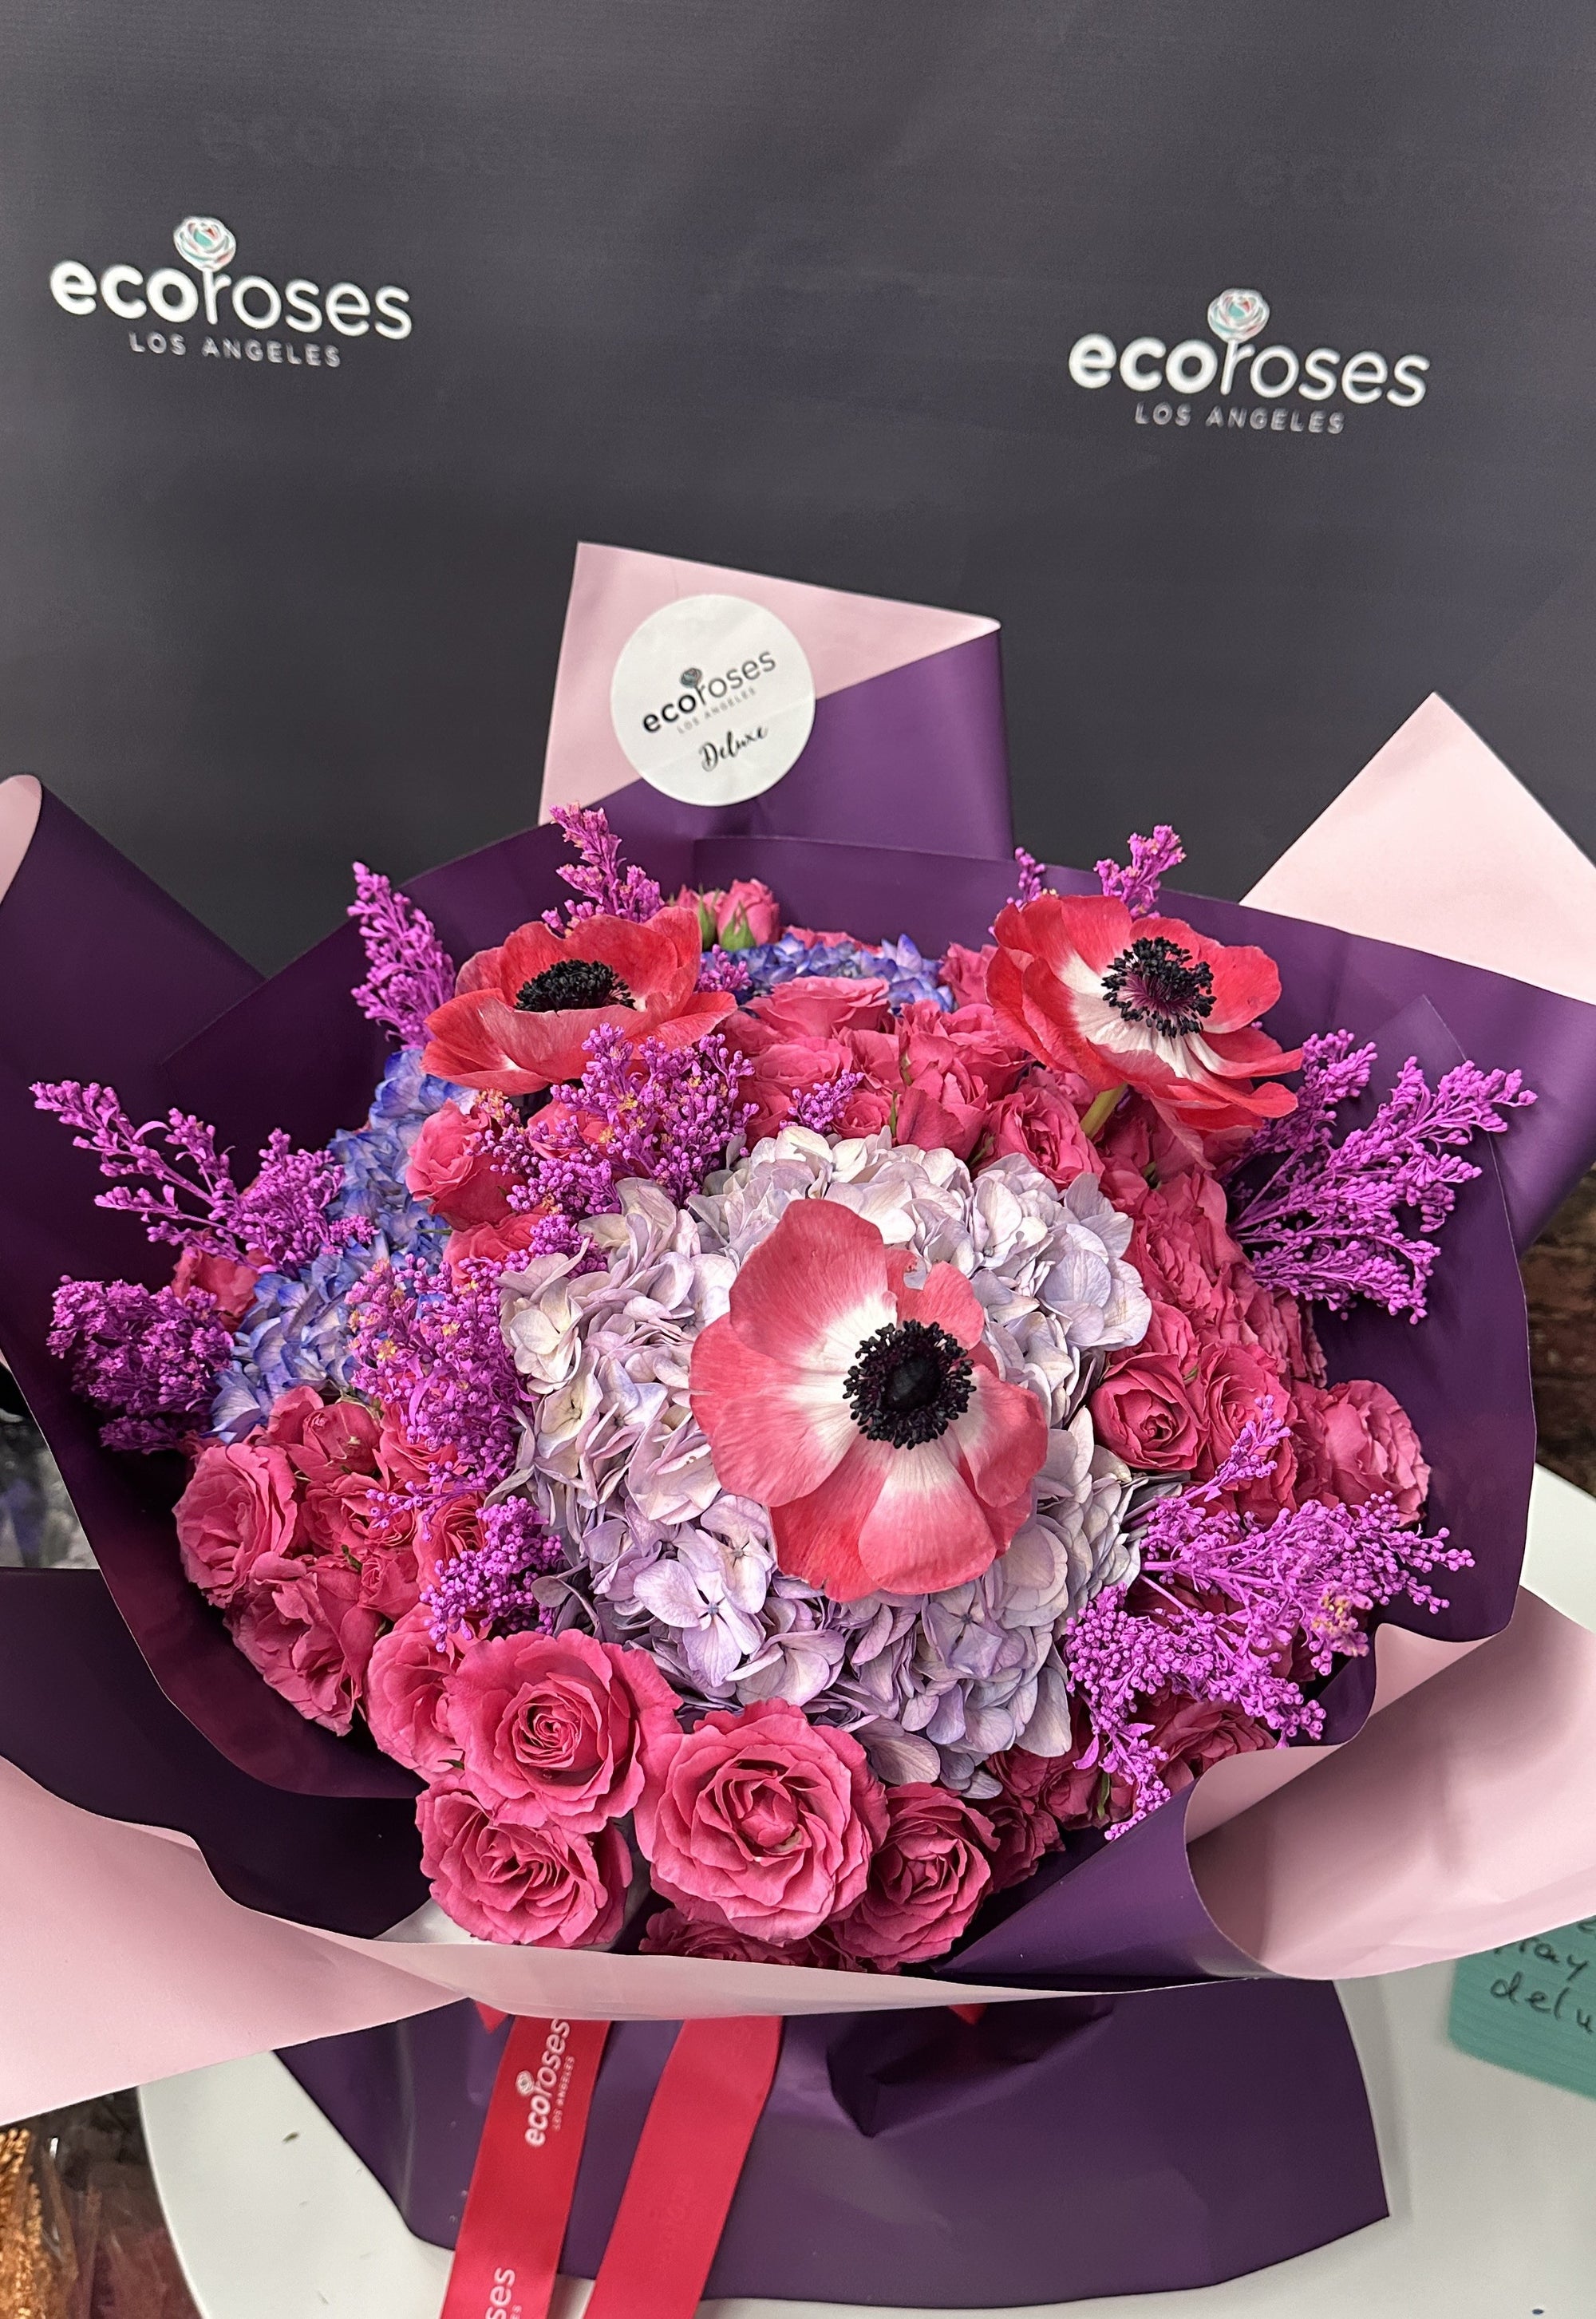 This deluxe bouquet is exquisite, with an array of anemones that will surely steal anyone's heart (including yours!). Treat yourself or someone special to the unique and stunning Anemone Amore Bouquet.